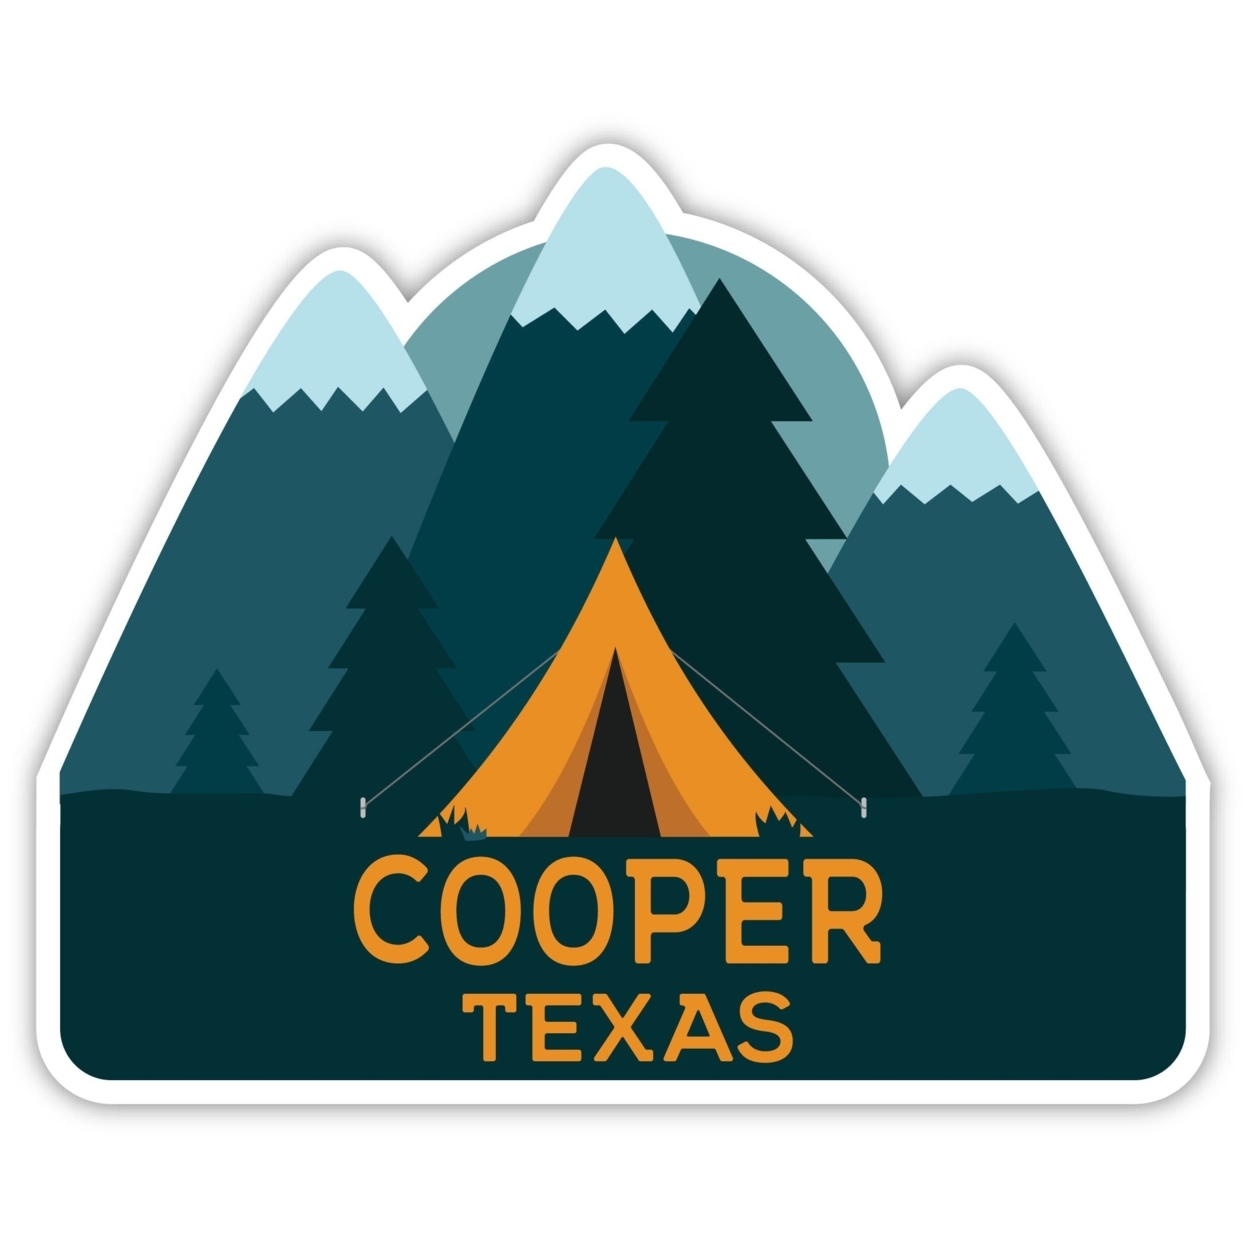 Cooper Texas Souvenir Decorative Stickers (Choose Theme And Size) - 4-Pack, 2-Inch, Tent